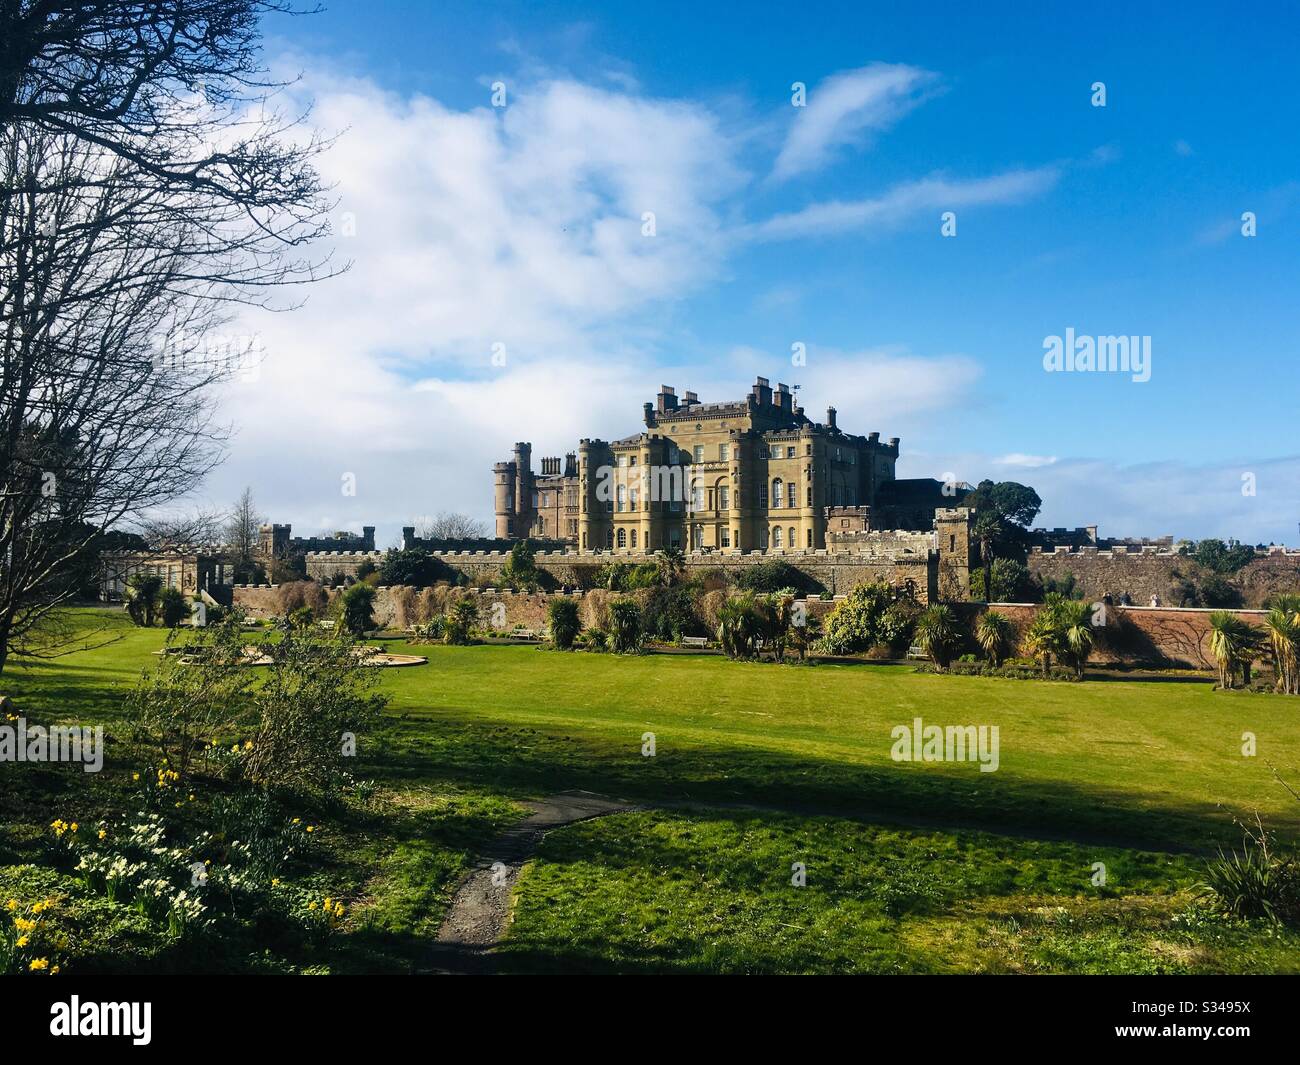 Culzean Castle, National Trust for Scotland, on the Firth of Clyde Coast, Ayrshire, Scotland in spring Stock Photo